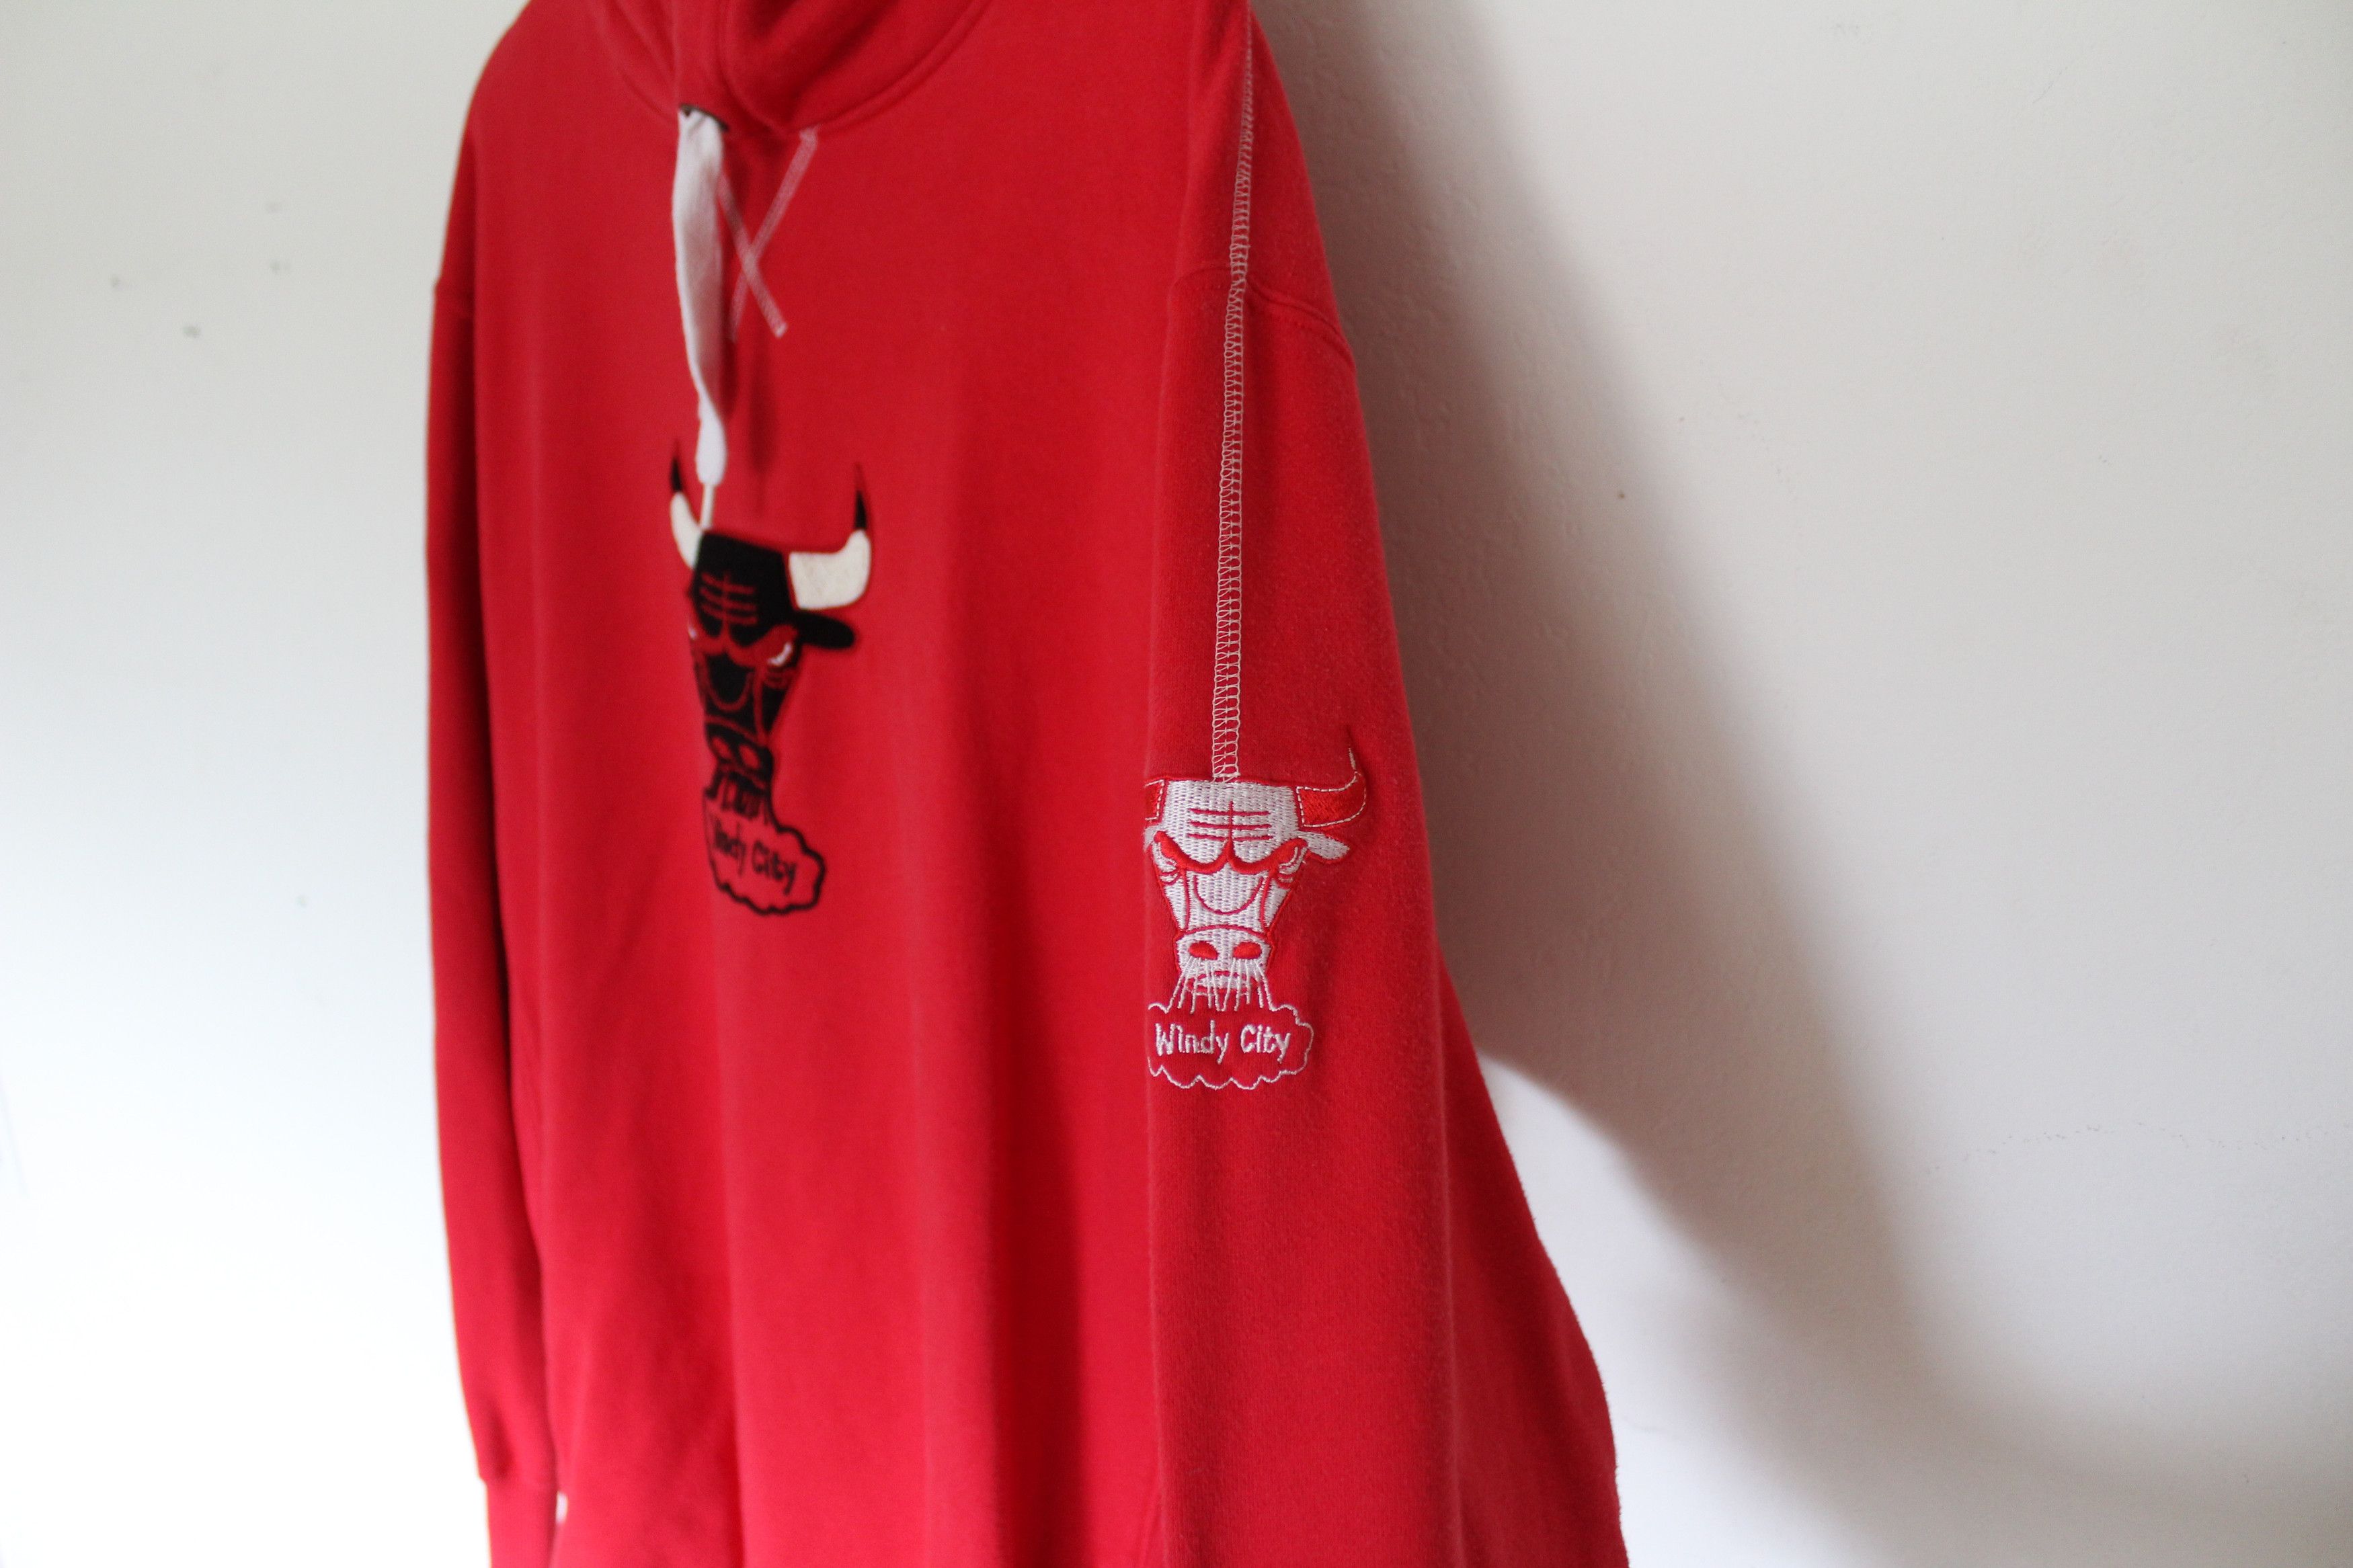 Chicago Bulls Embroidered Chicago Bulls Hoodie Size US L / EU 52-54 / 3 - 3 Thumbnail